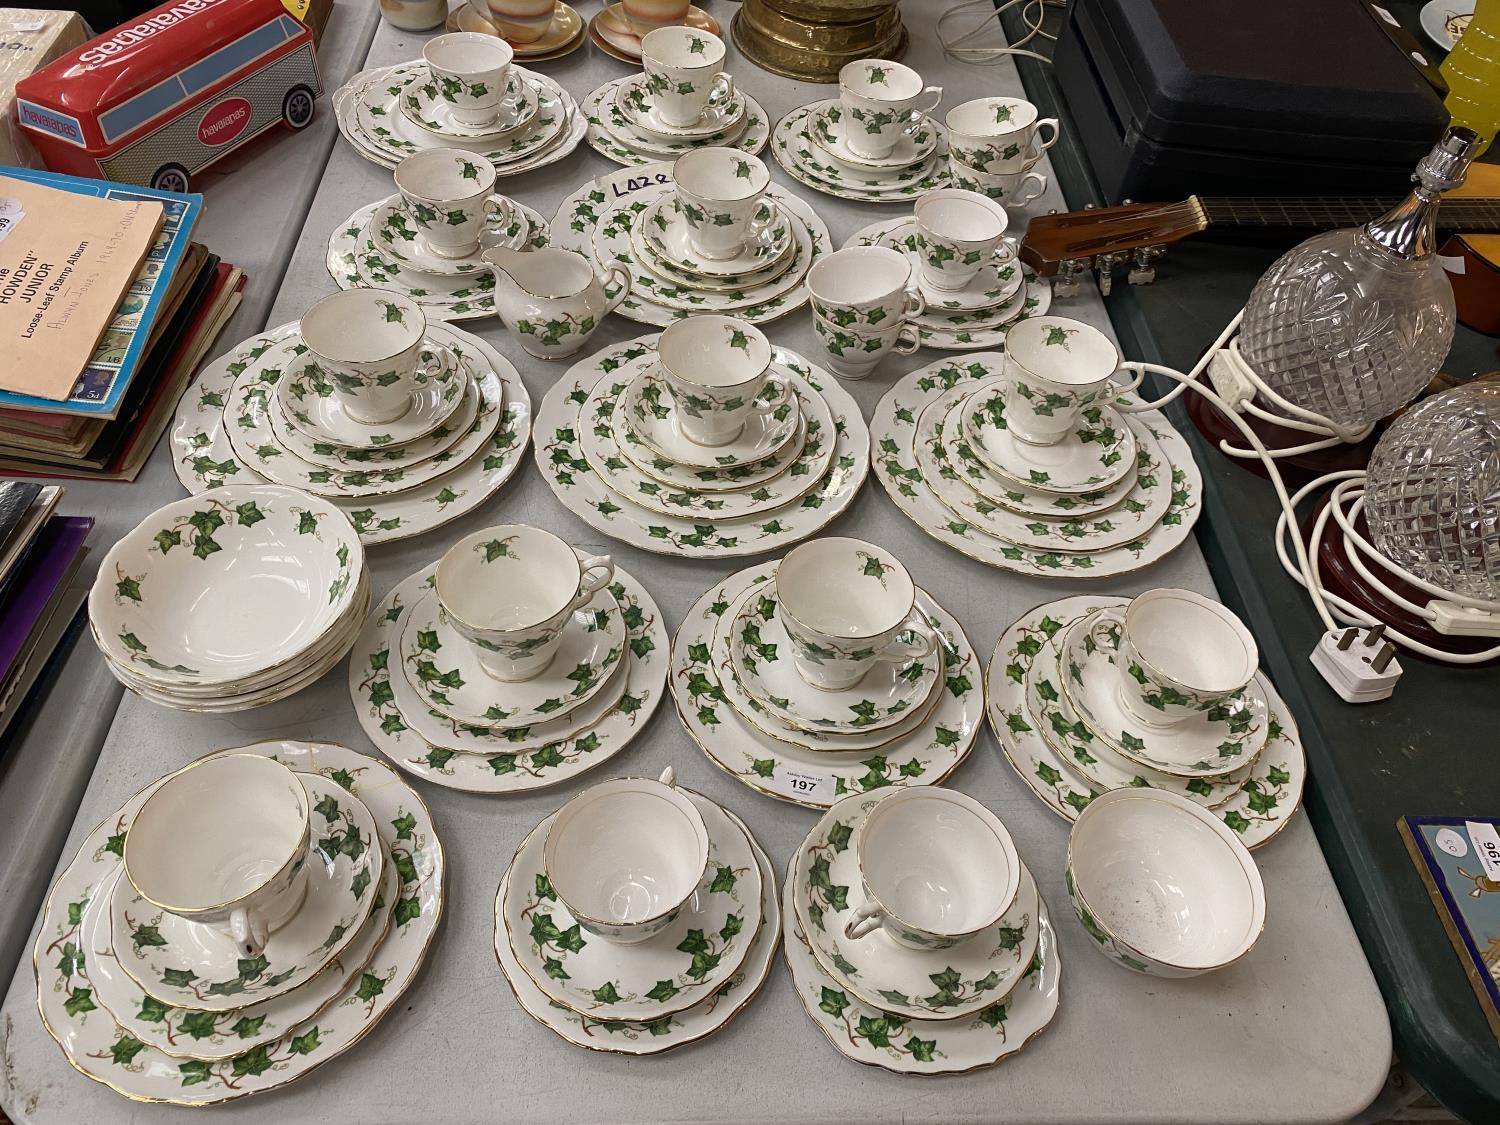 A LARGE COLLECTION OF COLCLOUGH 'IVY LEAF' BONE CHINA TO INCLUDE TEA CUPS, SAUCERS, PLATES, BOWLS,